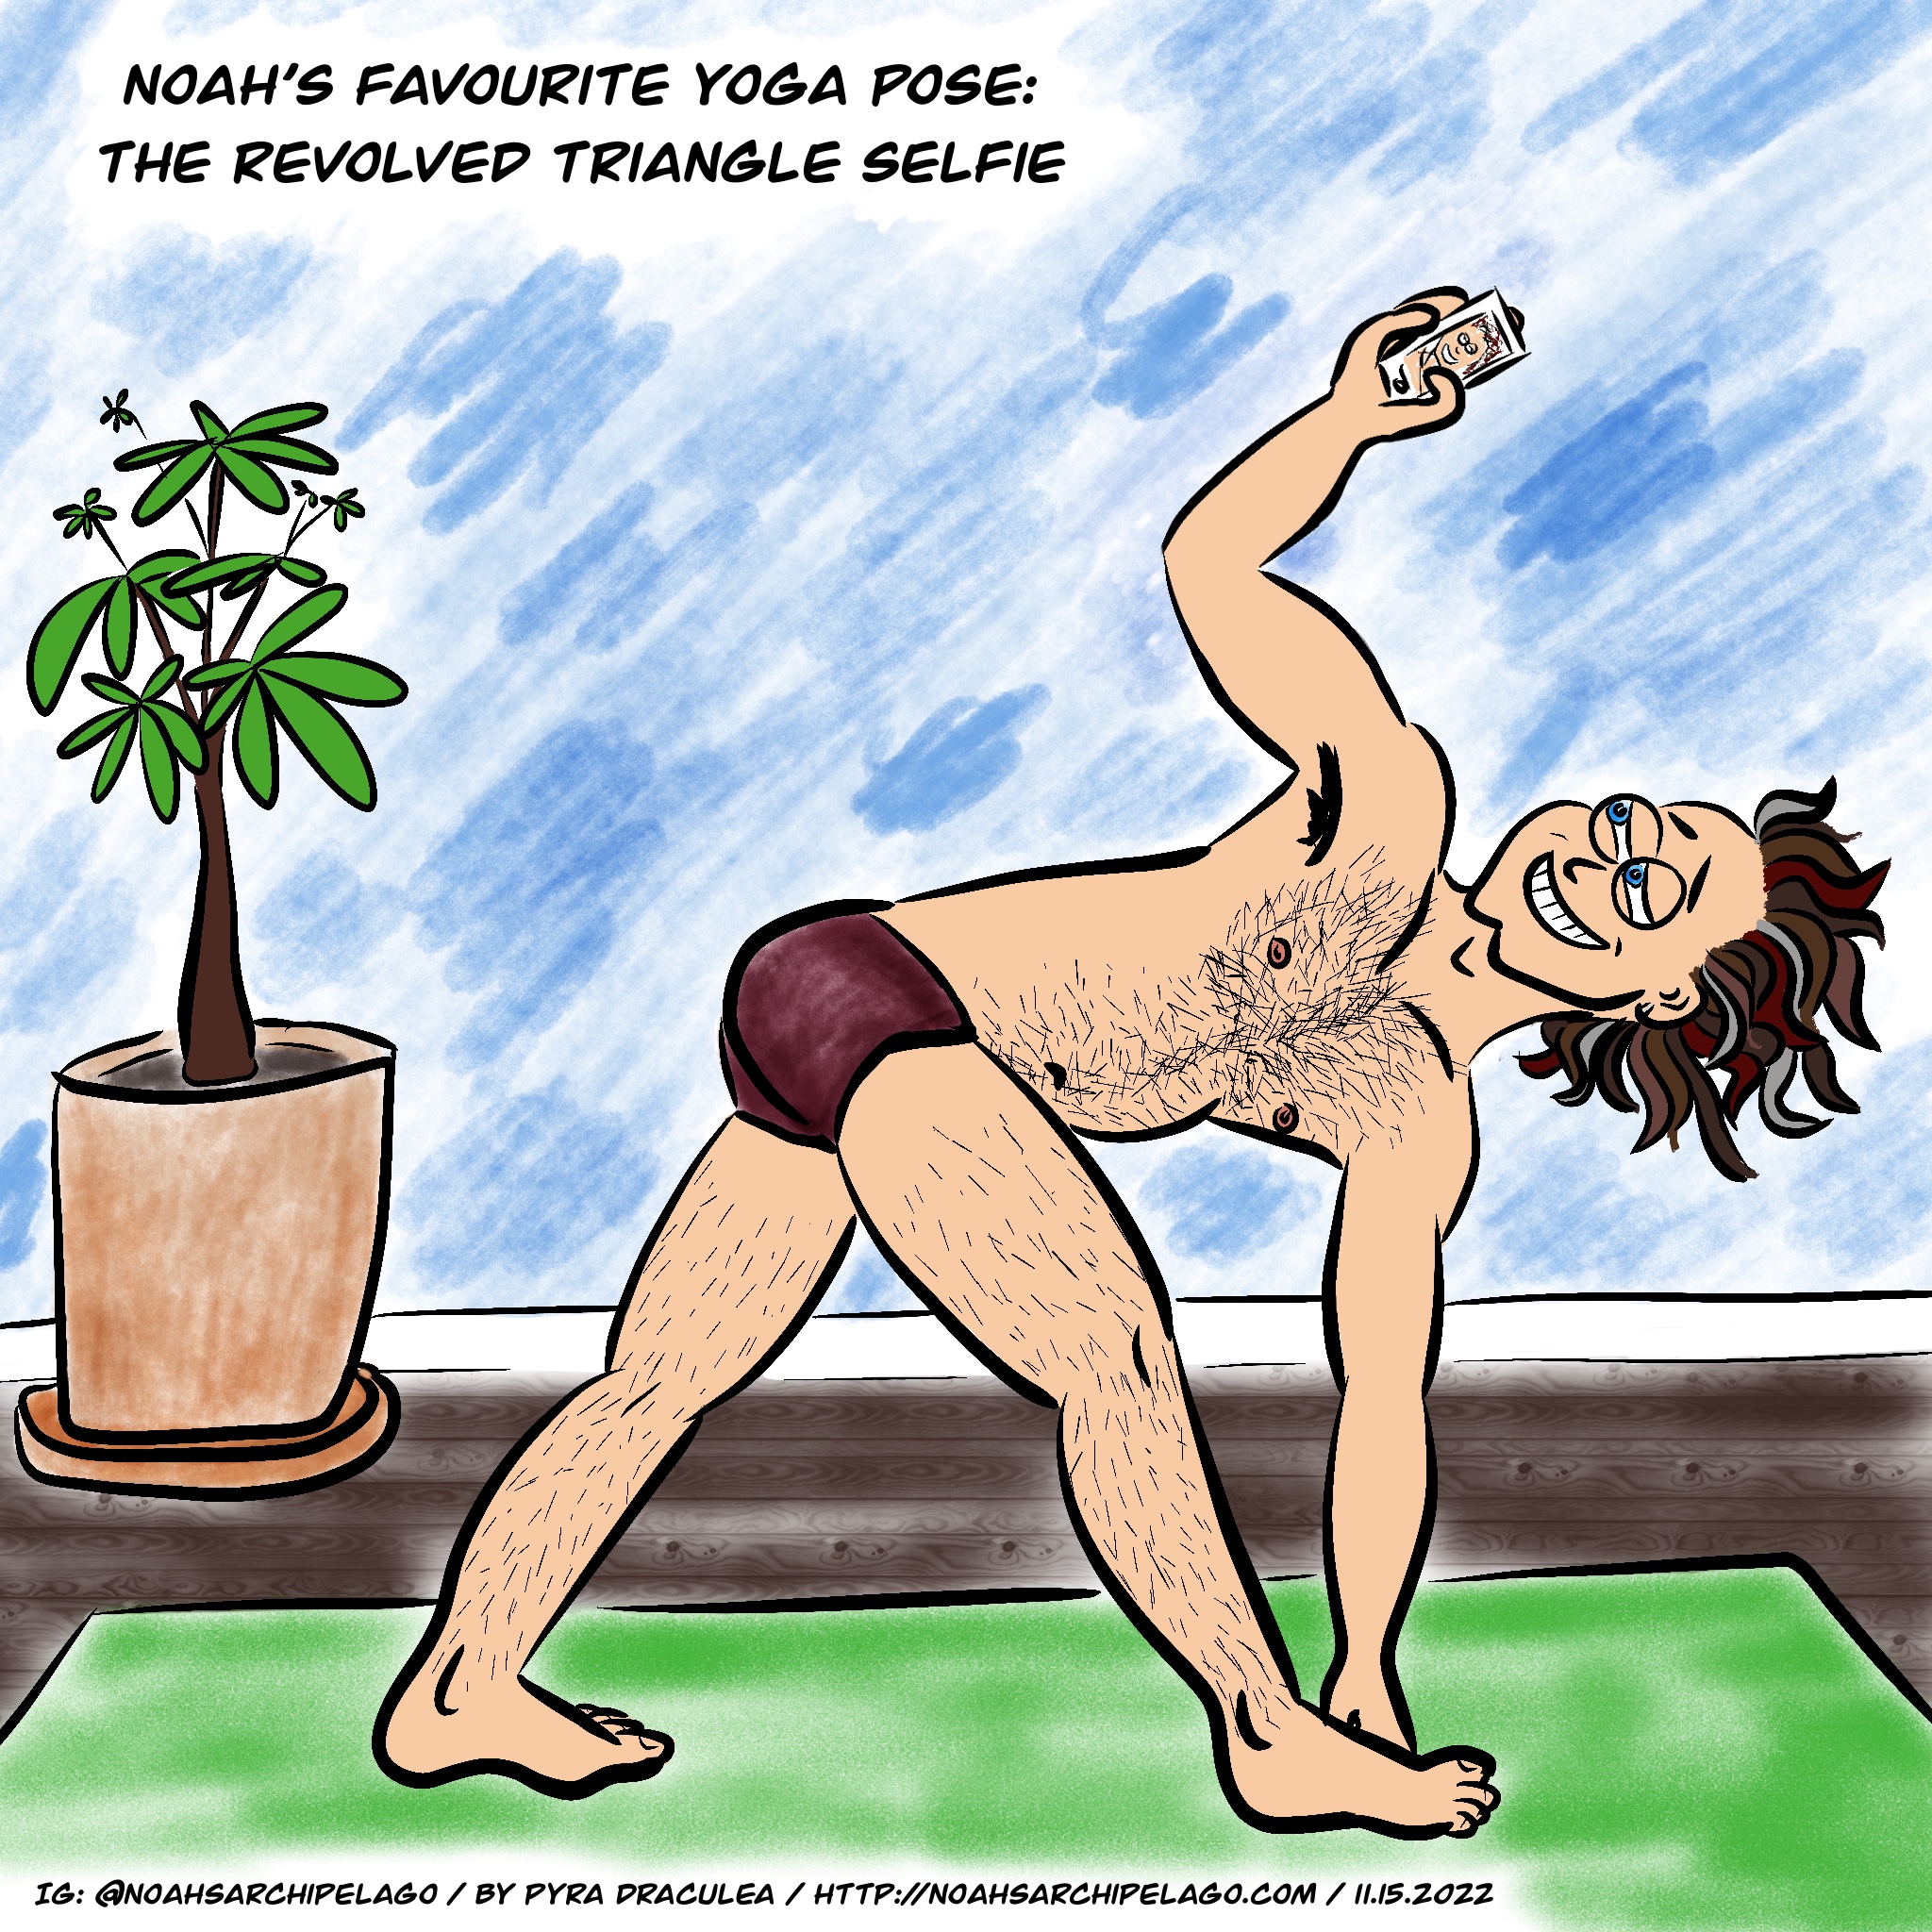 Noah is in the revolved triangle yoga pose while looking up at his phone and grinning. The caption: "Noah's Favorite Yoga Pose: The Revolved Triangle Selfie."